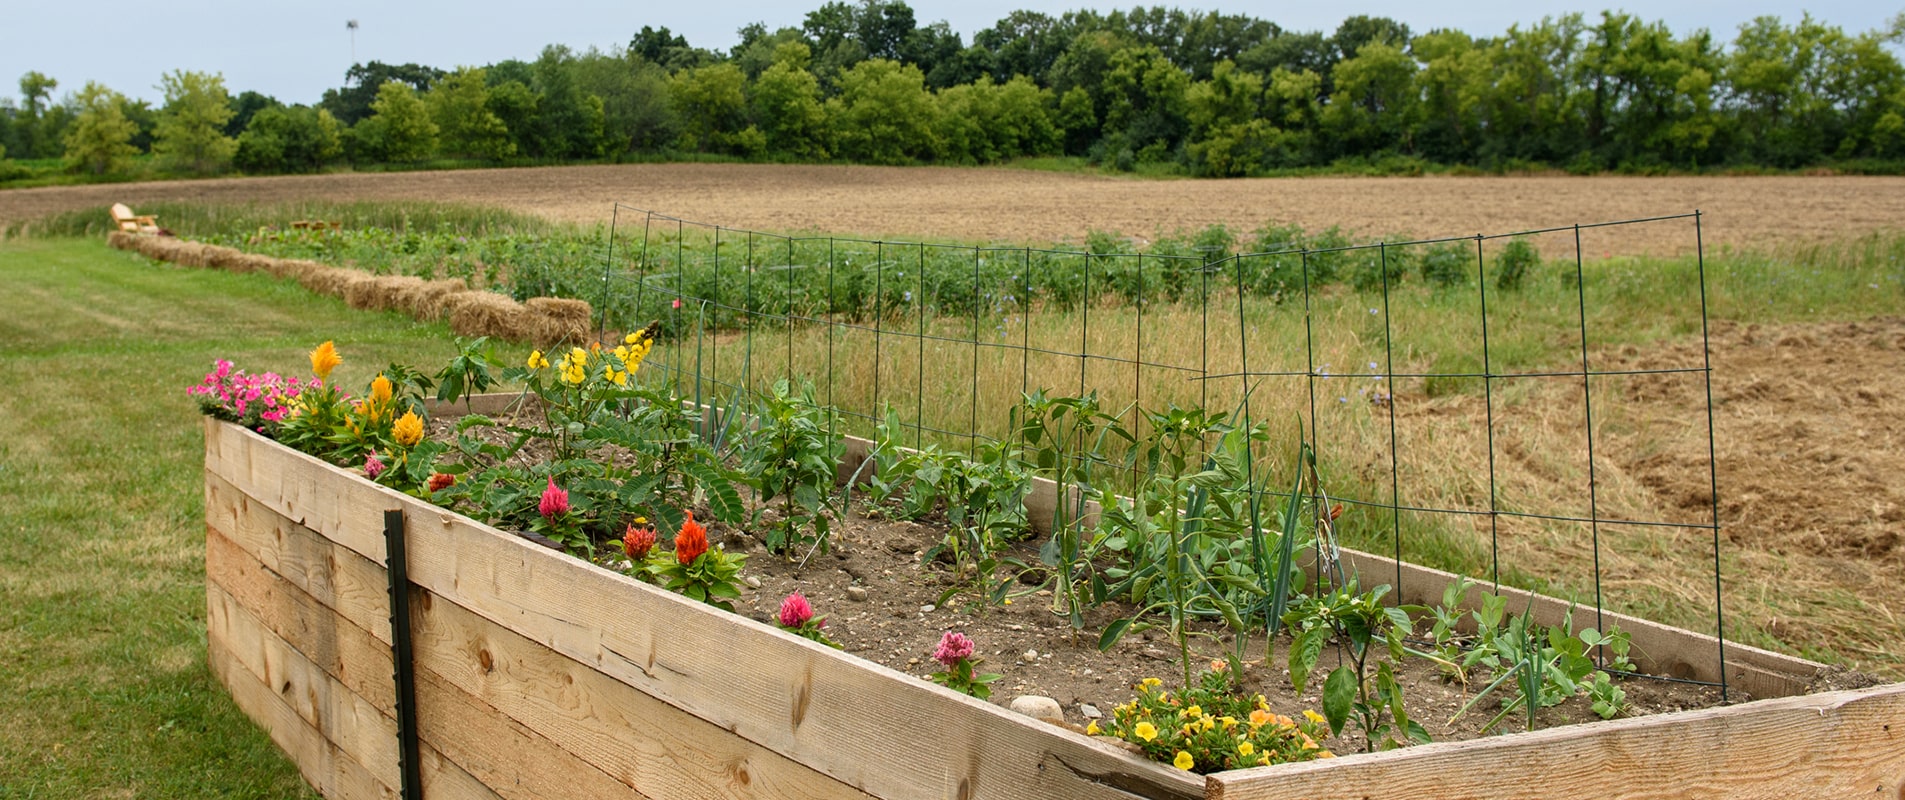 field with raised garden bed